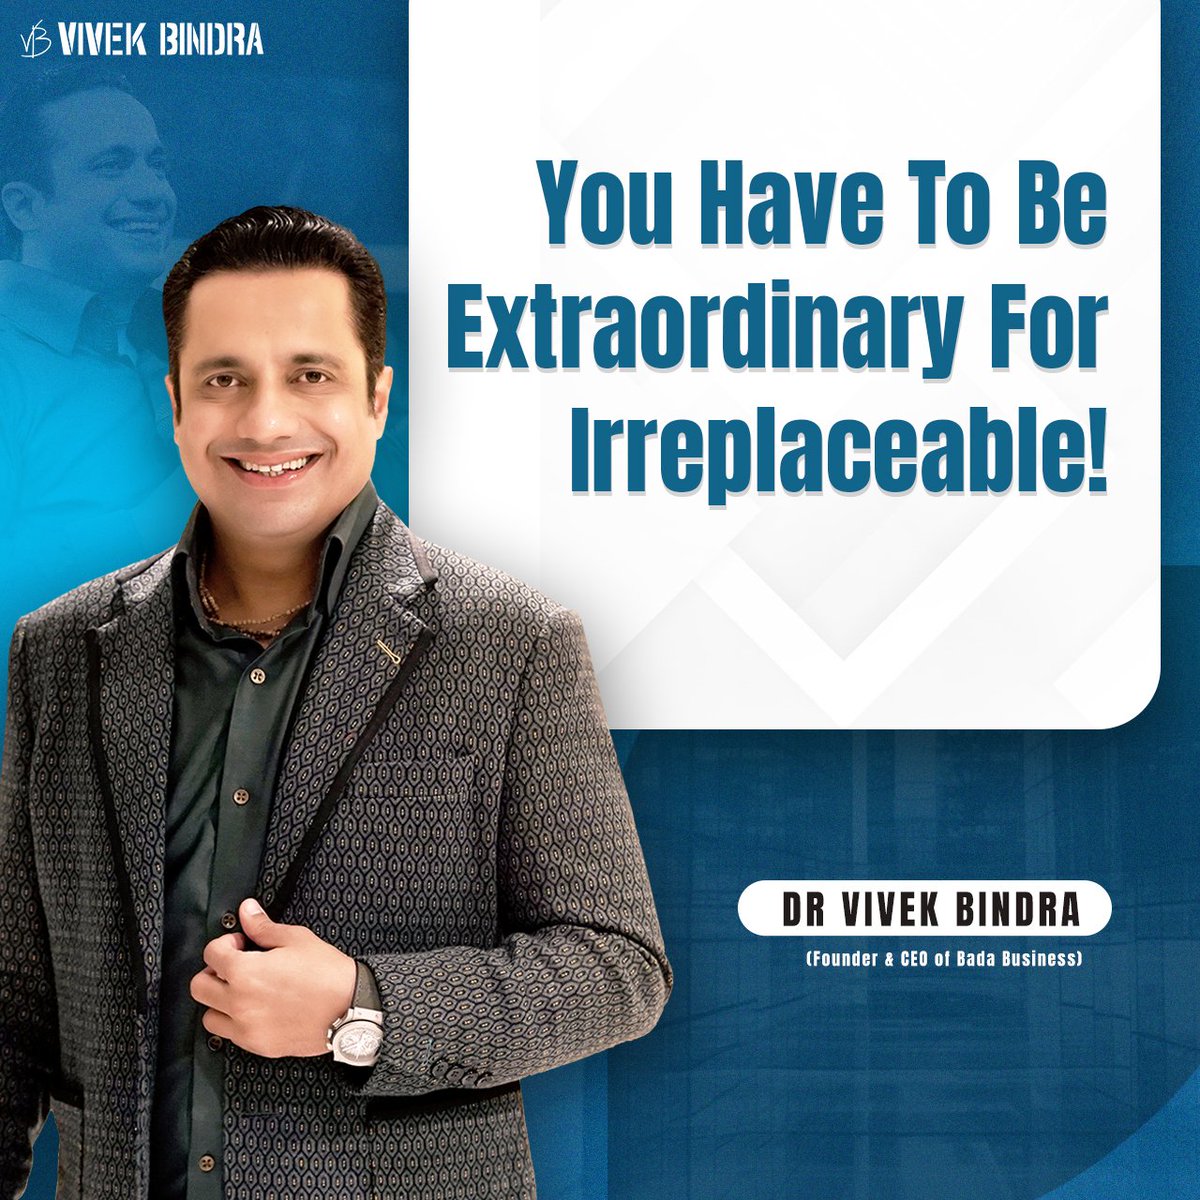 To be Irreplaceable, you need to be Extraordinary in your work. #VBQuote #Motivation #DrVivekBindra #BadaBusiness